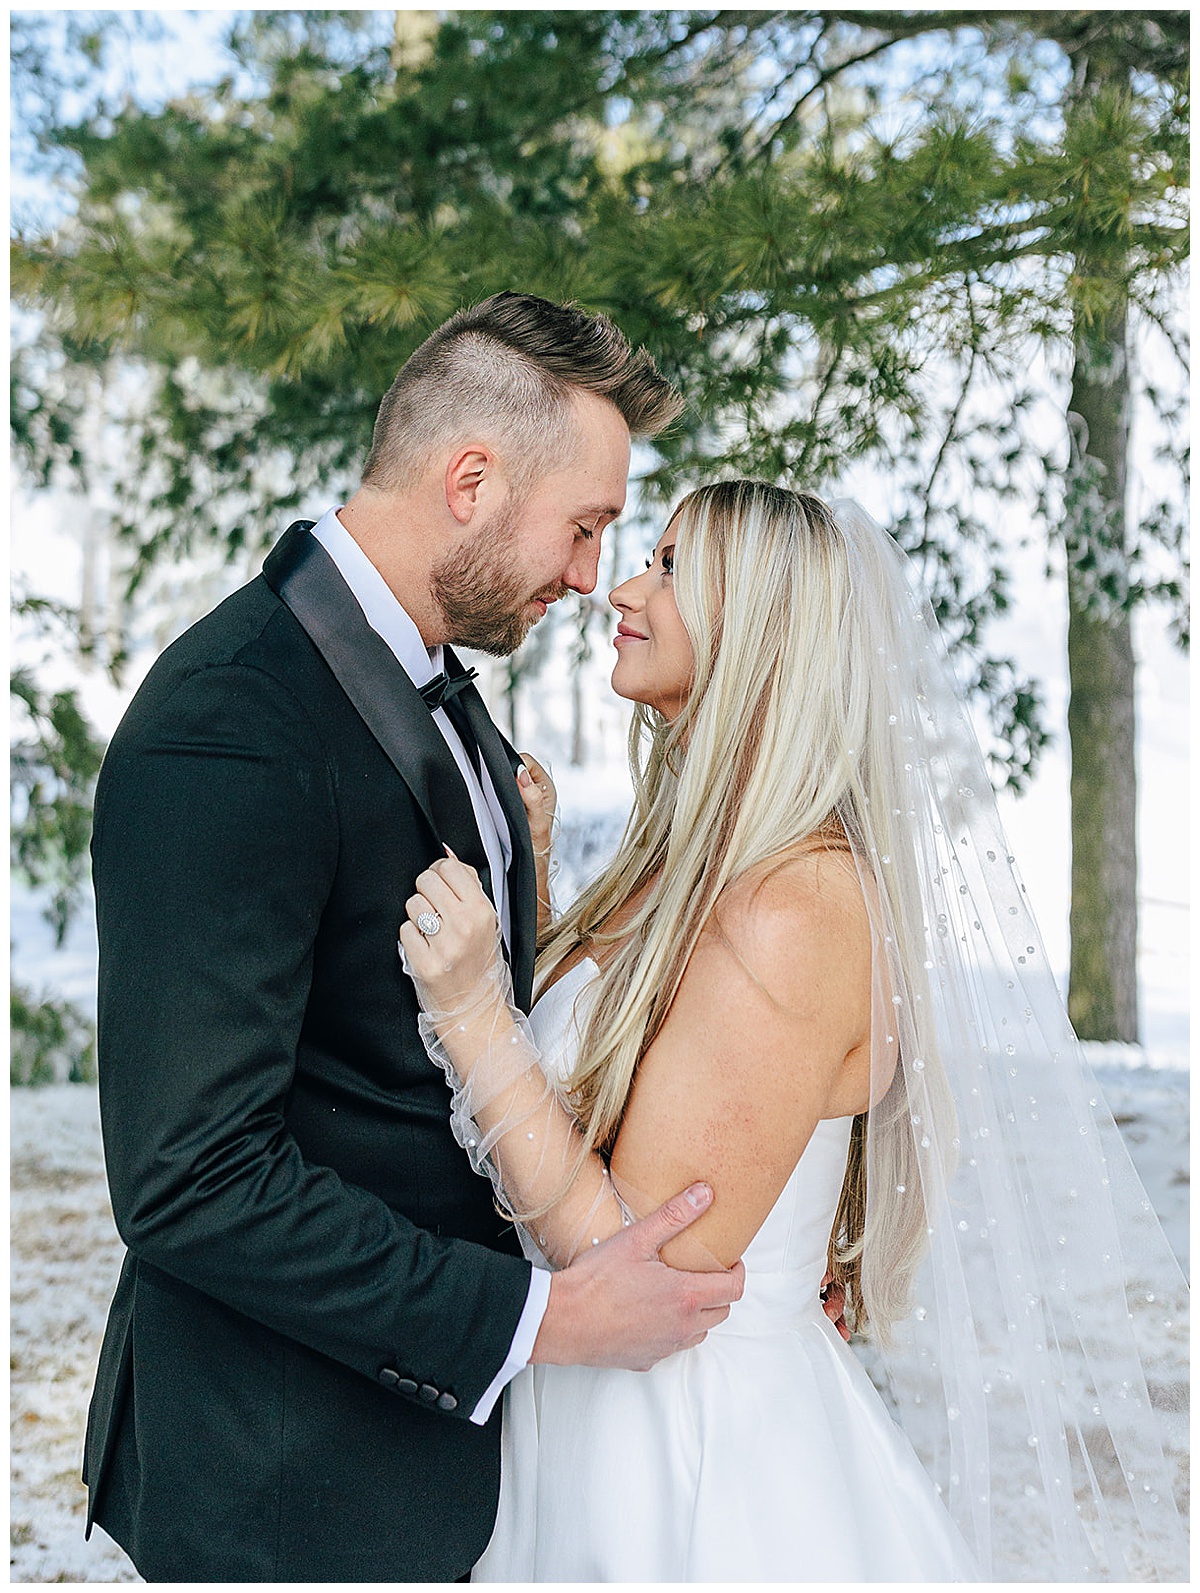 Husband and wife cuddle up close together for Detroit Wedding Photographer